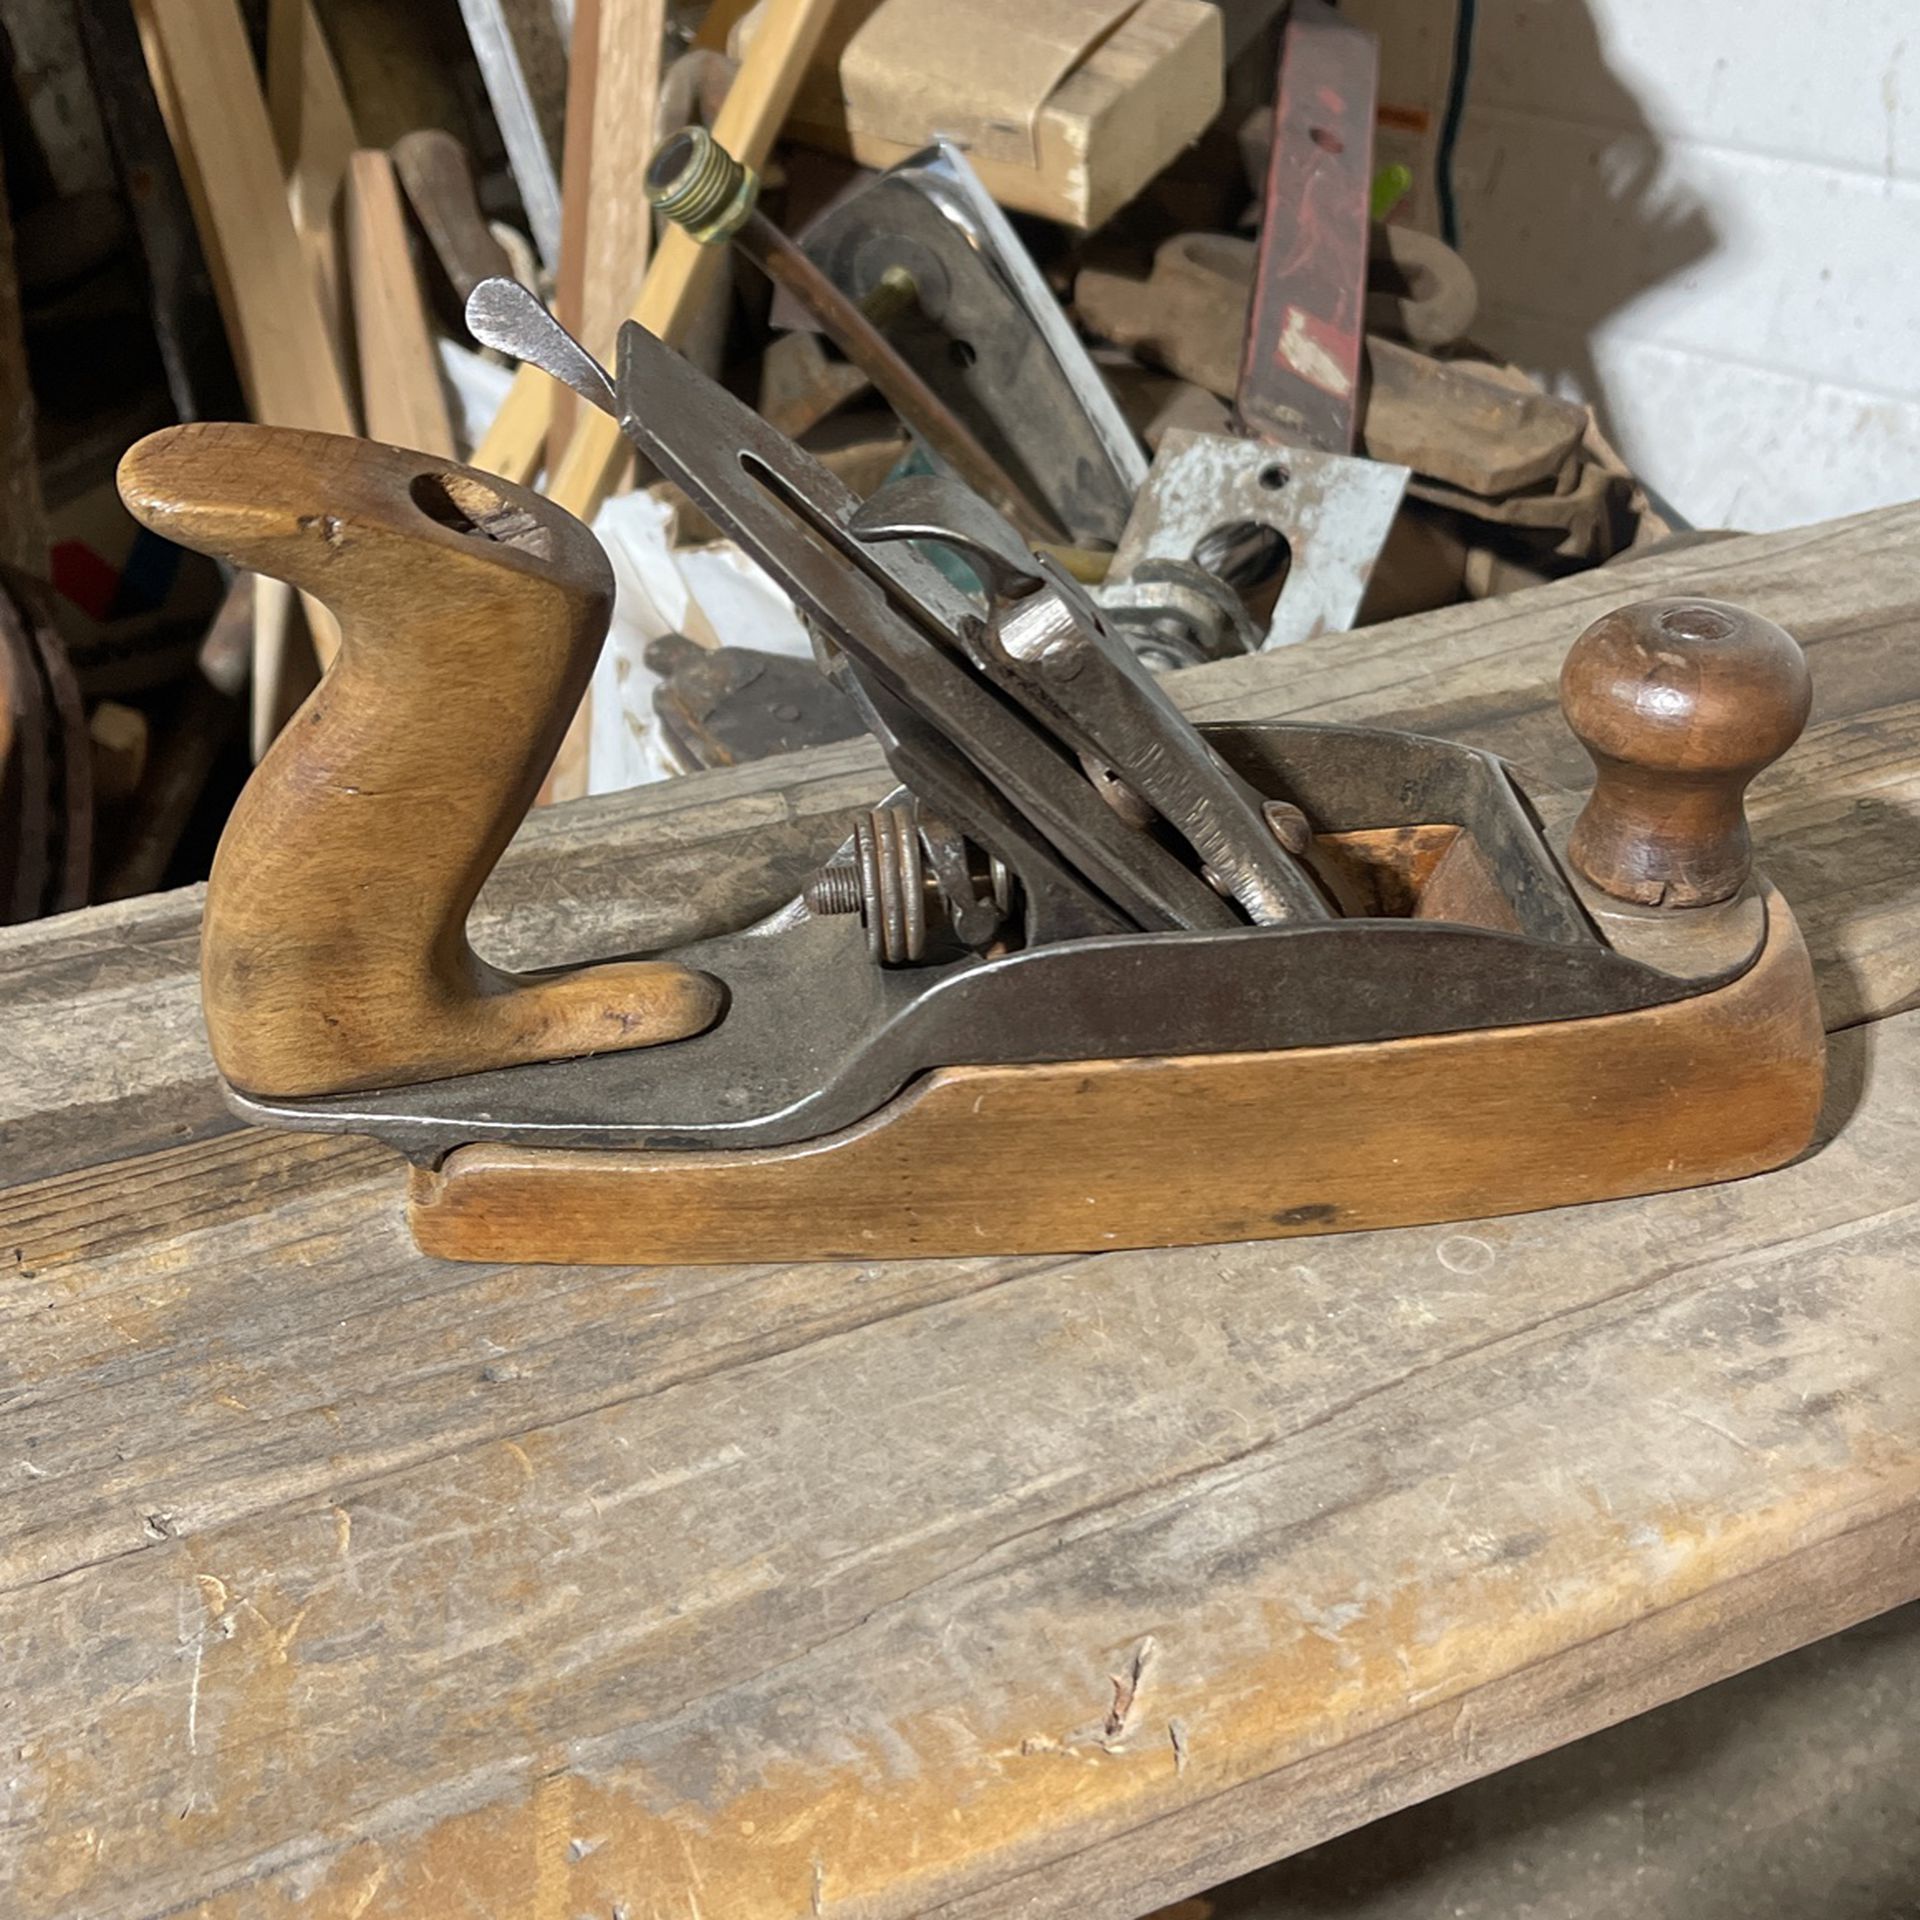 No. 36 Transitional Handled Smooth Plane